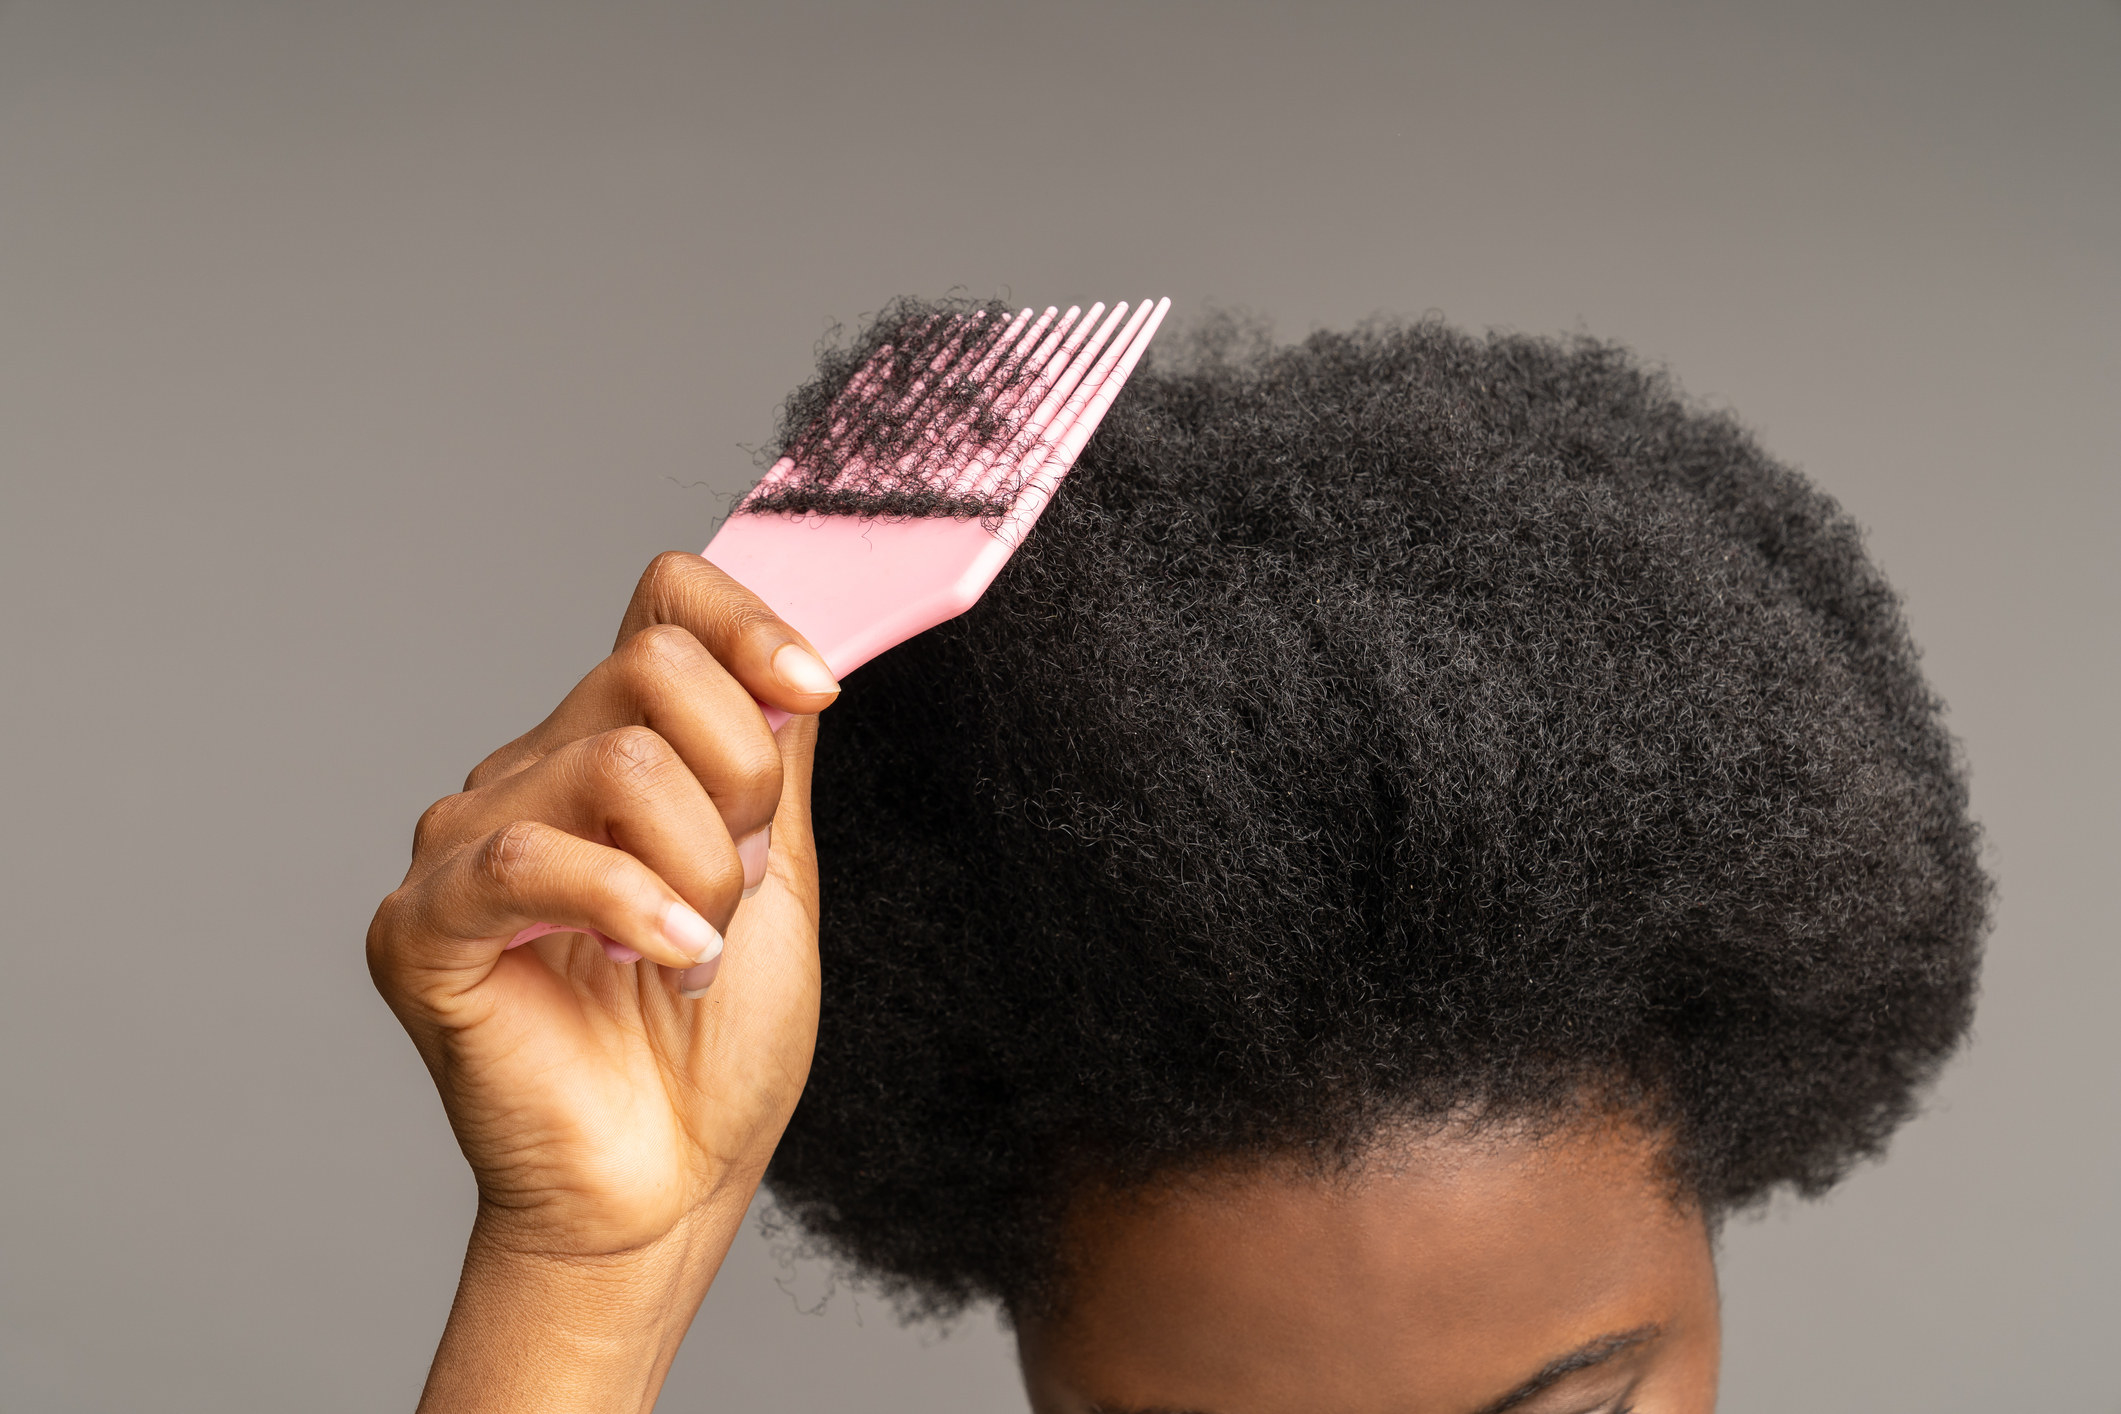 10 Big Natural Hair Mistakes You Might Be Making